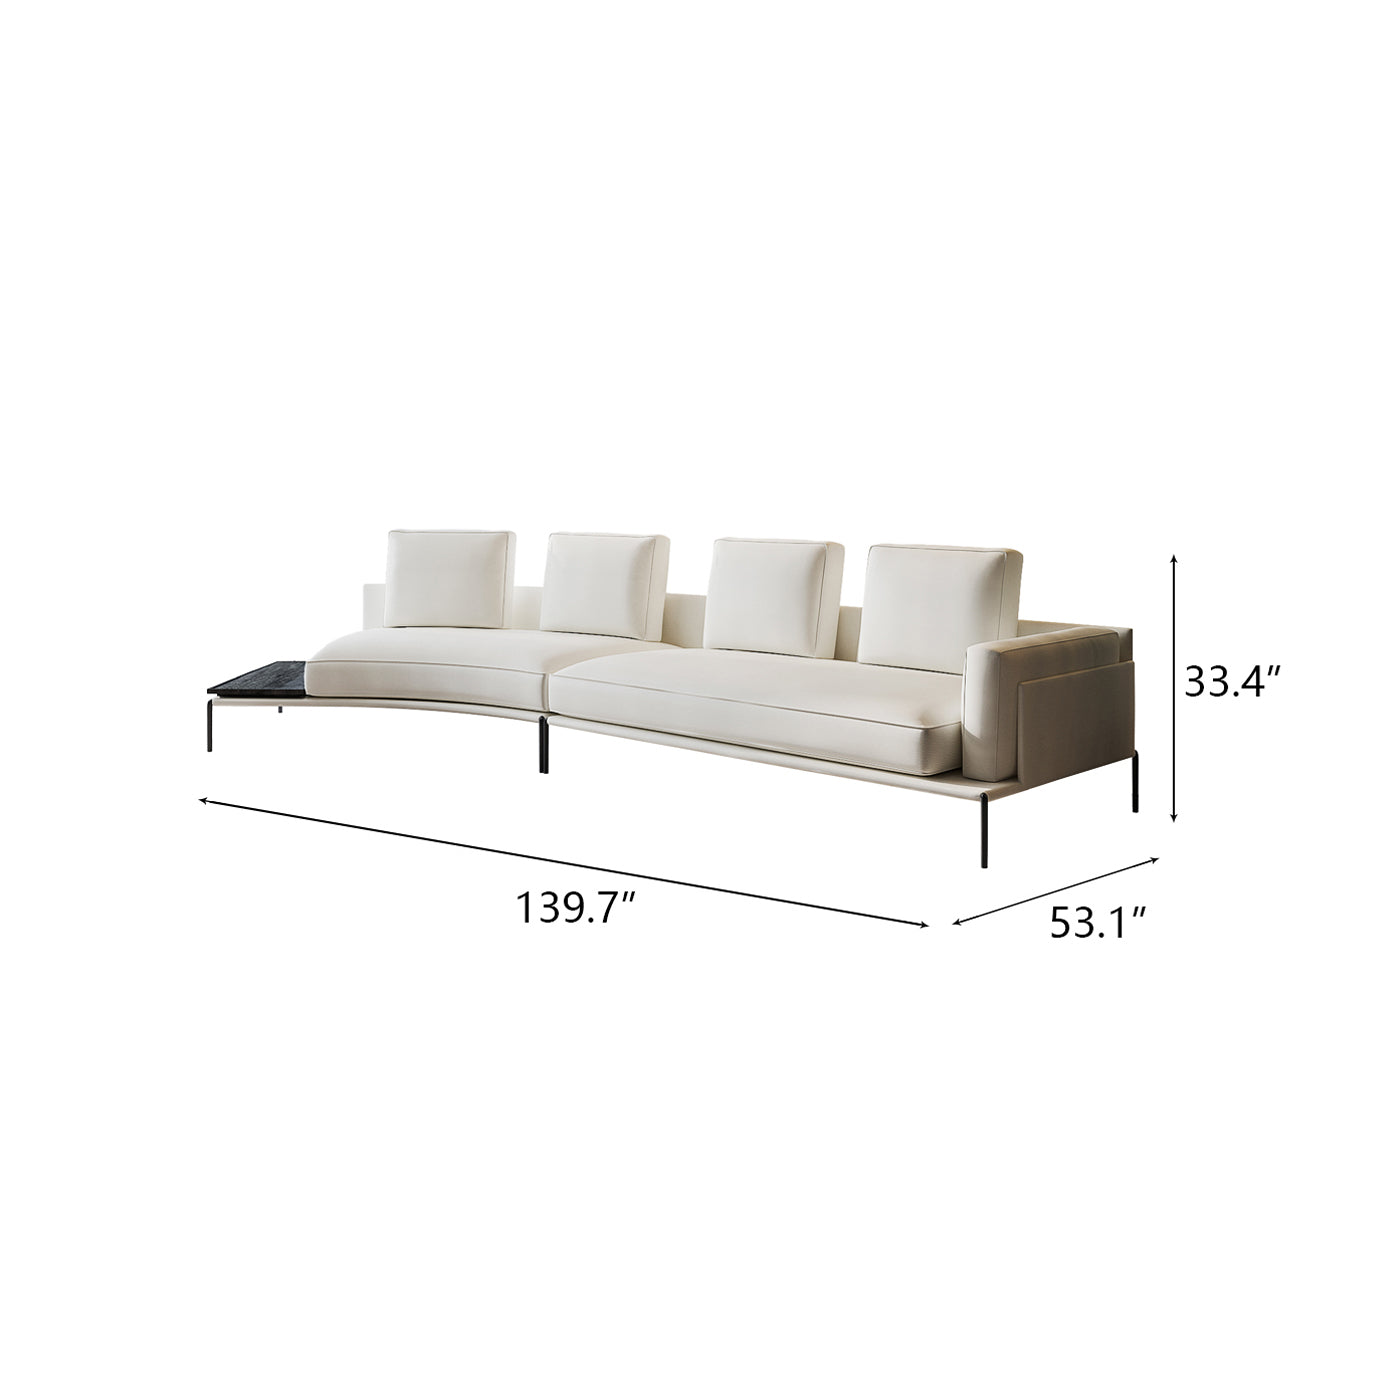 Modern Italian White Leather Chaise Lonuge Sofa, with Metal Legs